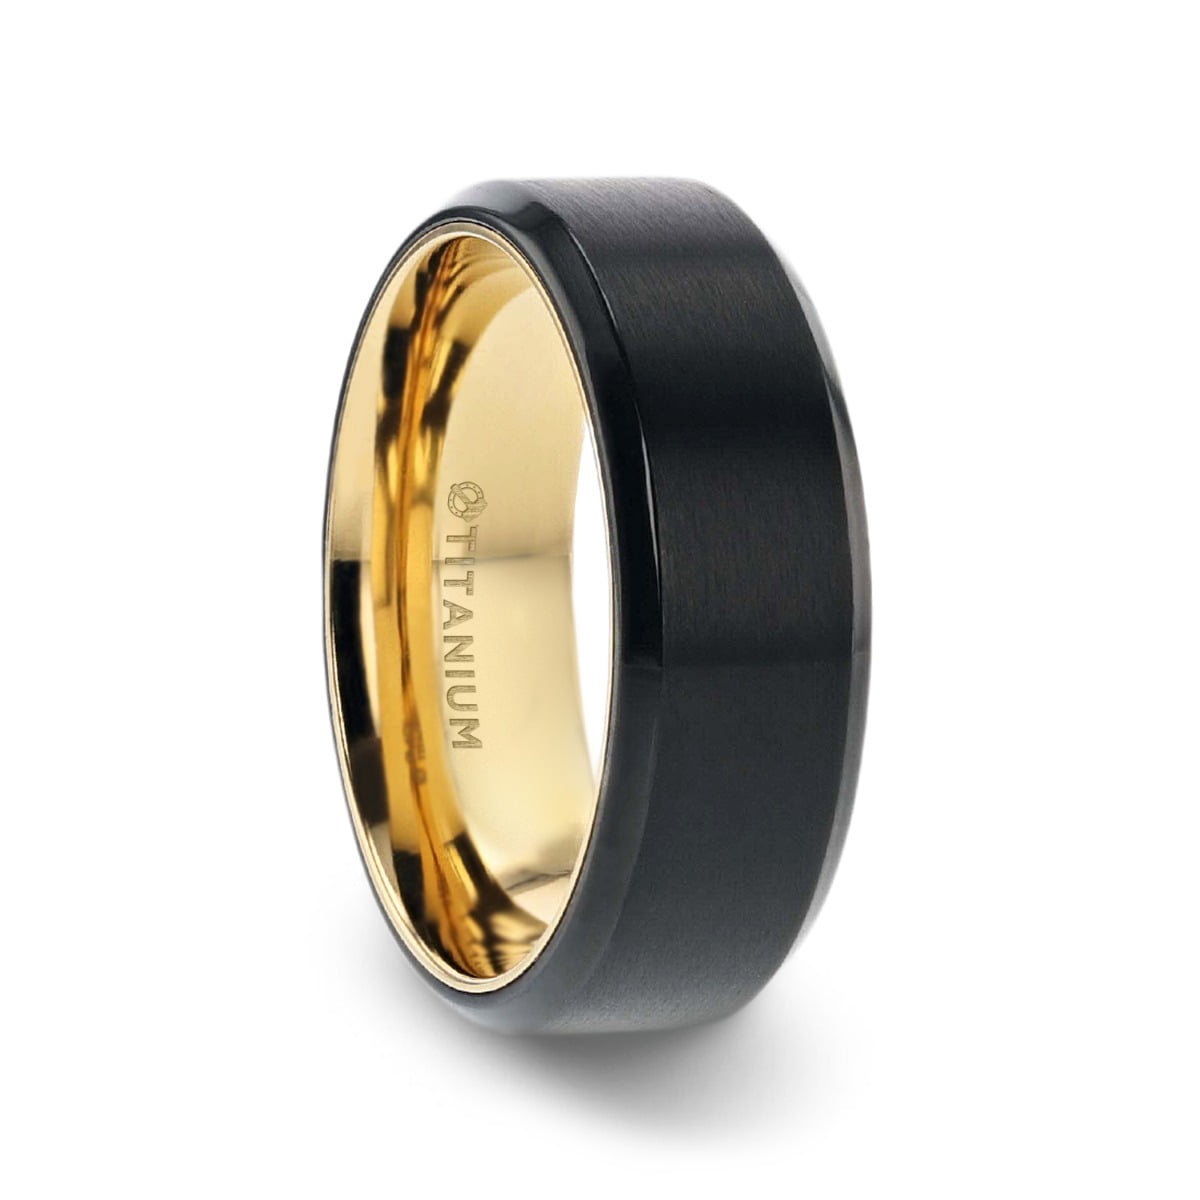 size 12 TITANIUM Matte Finished RING BAND with Gold Plated Beveled Edges 